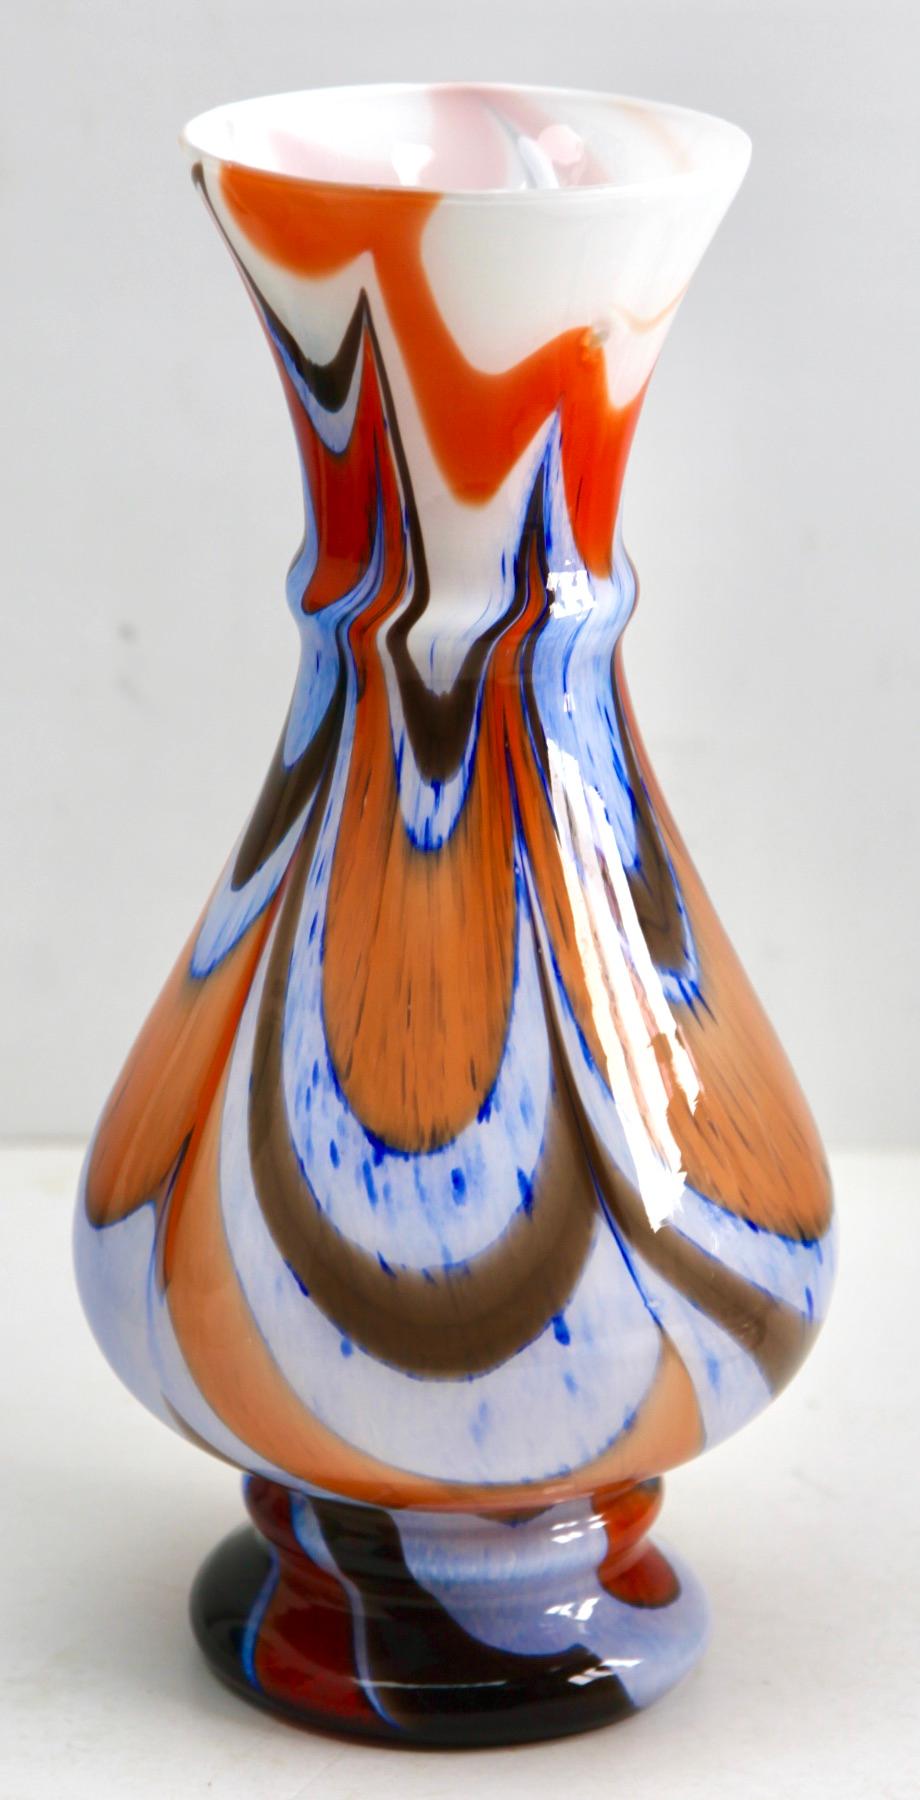 Vintage opaline from Florence.
This is a rare color and size, a must have for any collector.

Looks simply stunning.
The piece is in excellent condition and a real beauty!



With best wishes, Geert
?Early Bird